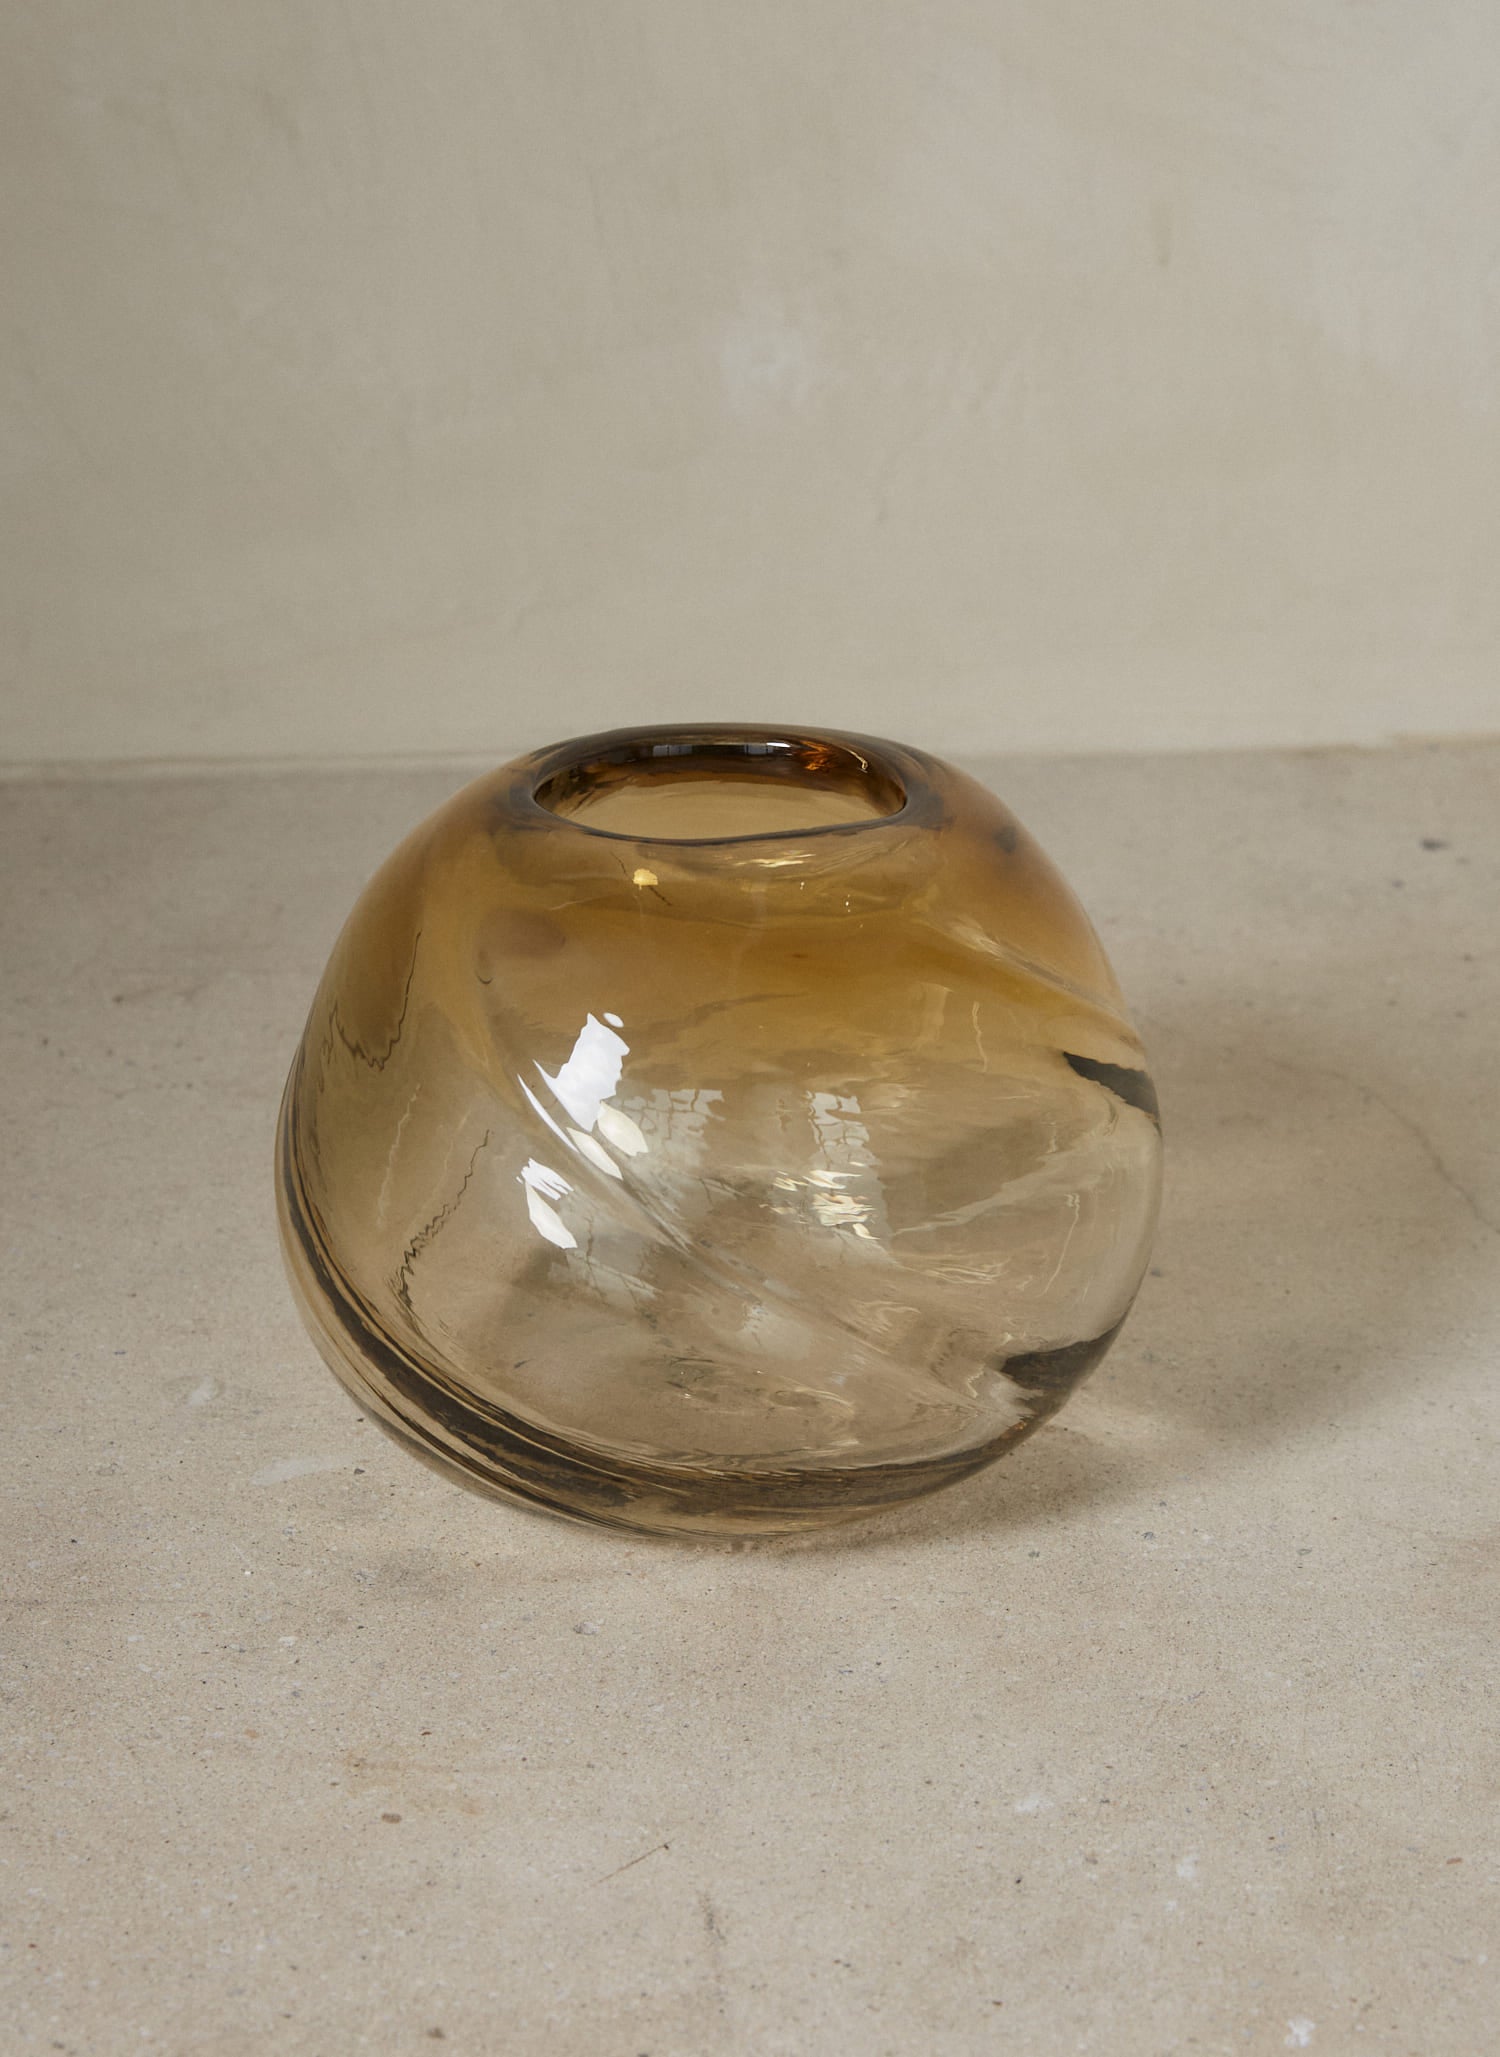 Round Water Swirl Vase. A mouth-blown vase in translucent light yellow glass recalling a whirl of cascading liquid, with twisting details that signify movement.